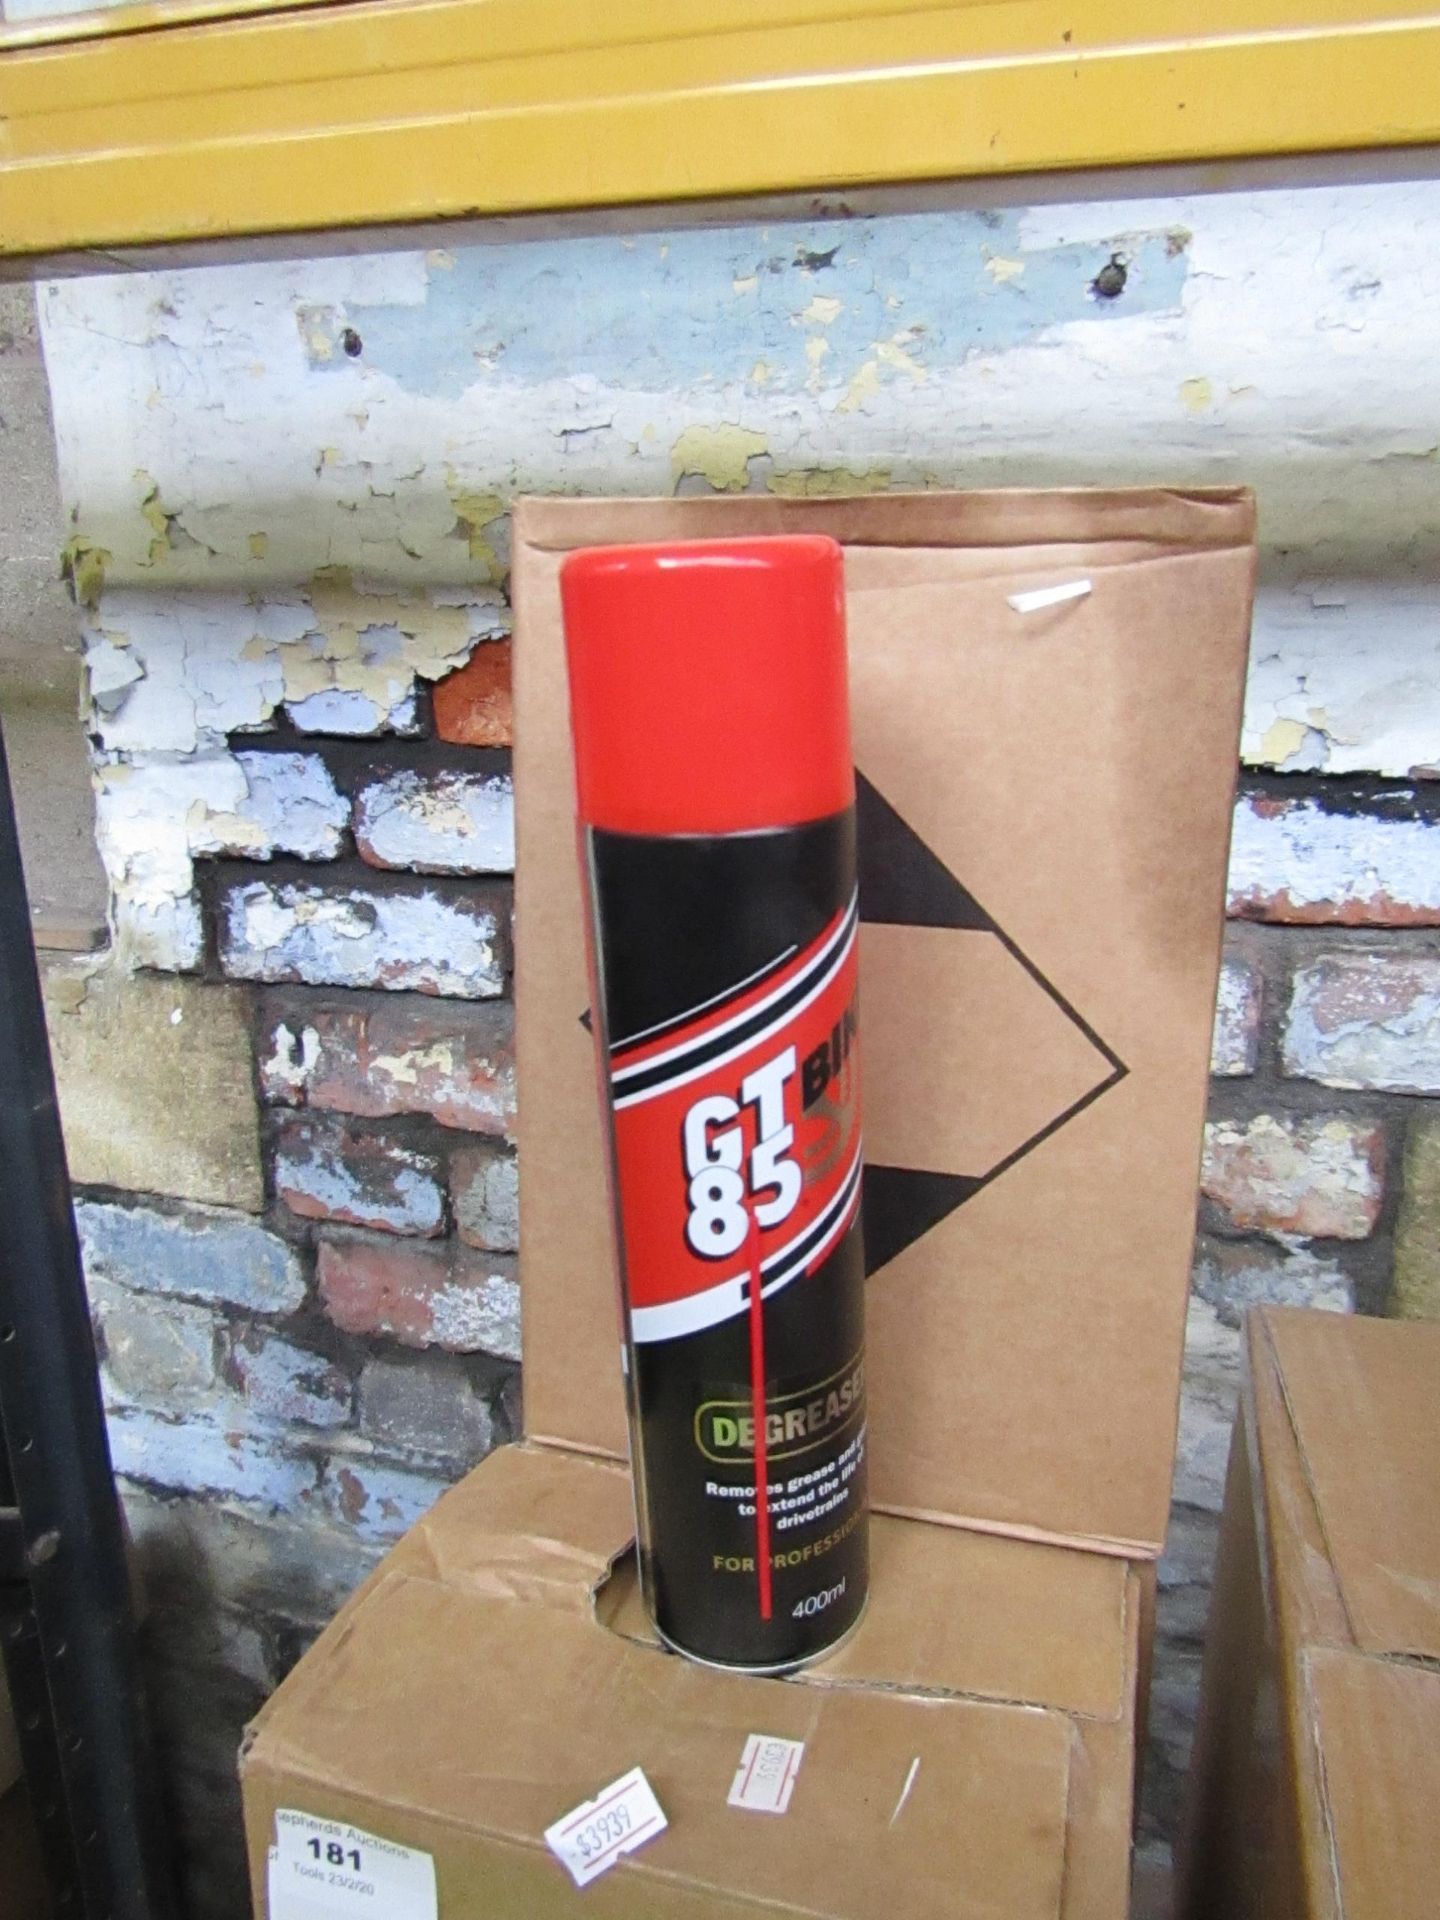 6x 400ml Canisters of GT85 Degreaser, removes dirt and grime from bike drive trains, new